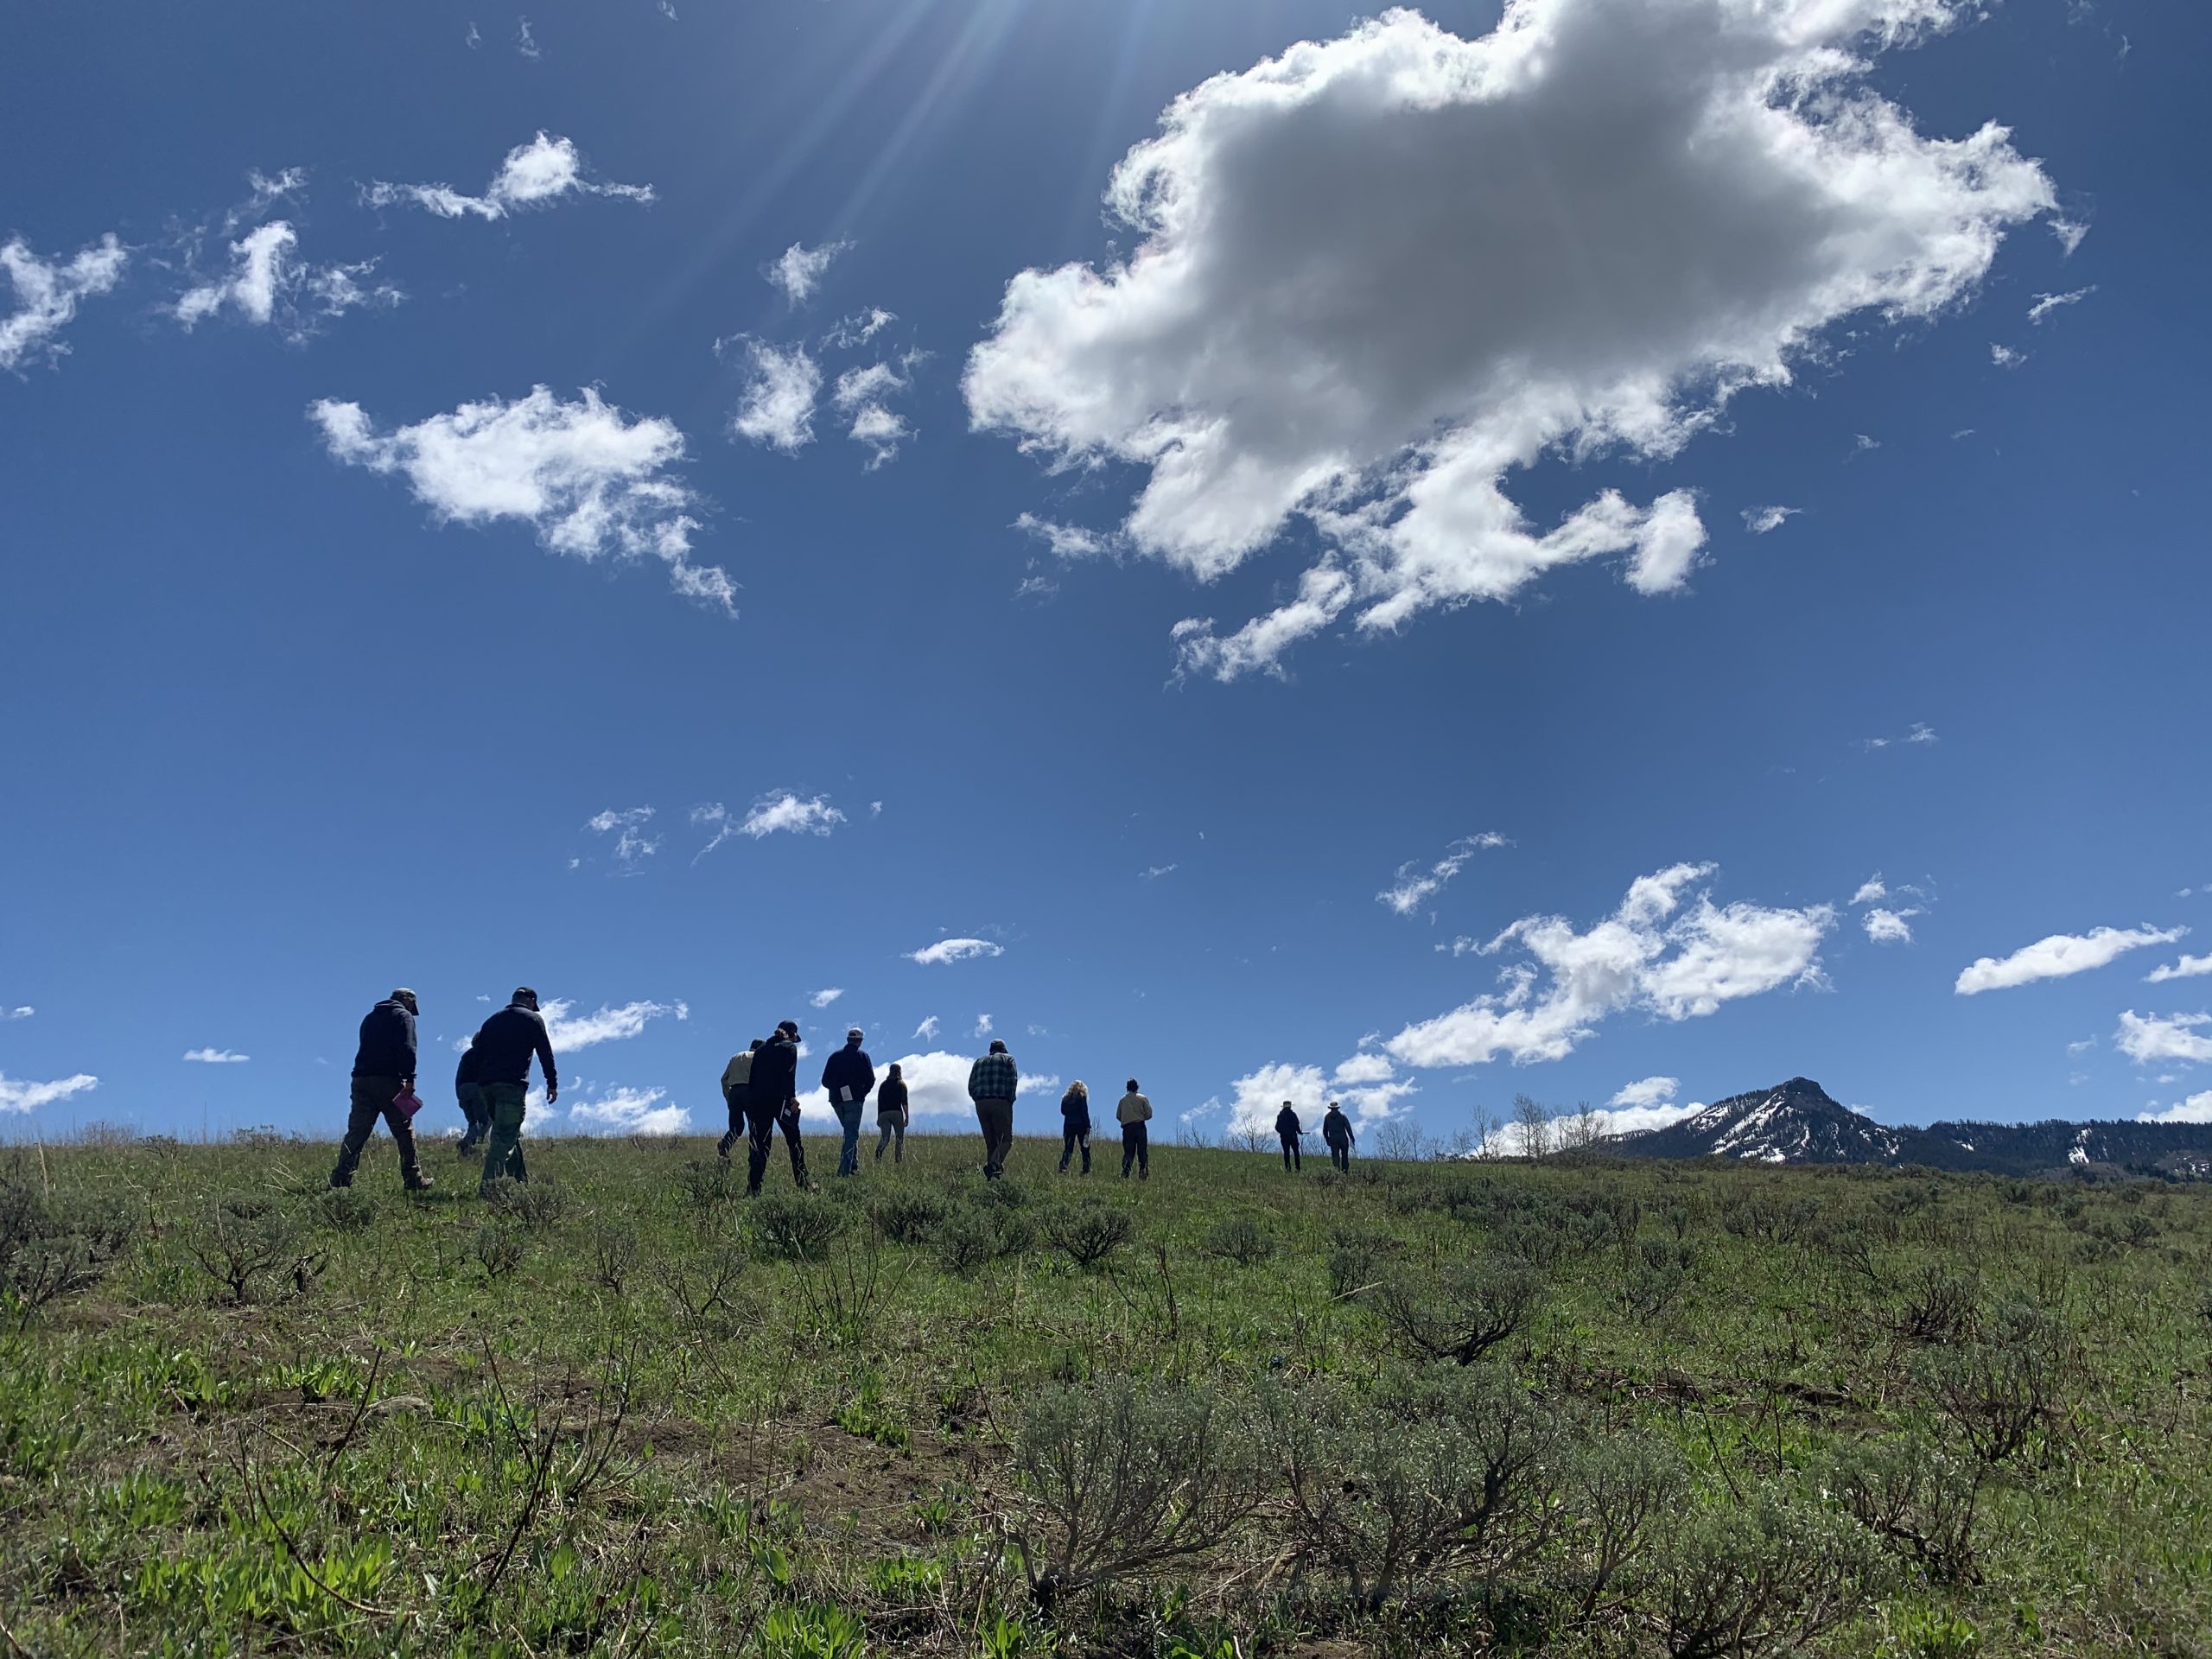 A group of people walking through a green field with blue sky and clouds overhead and a mountain in the background.